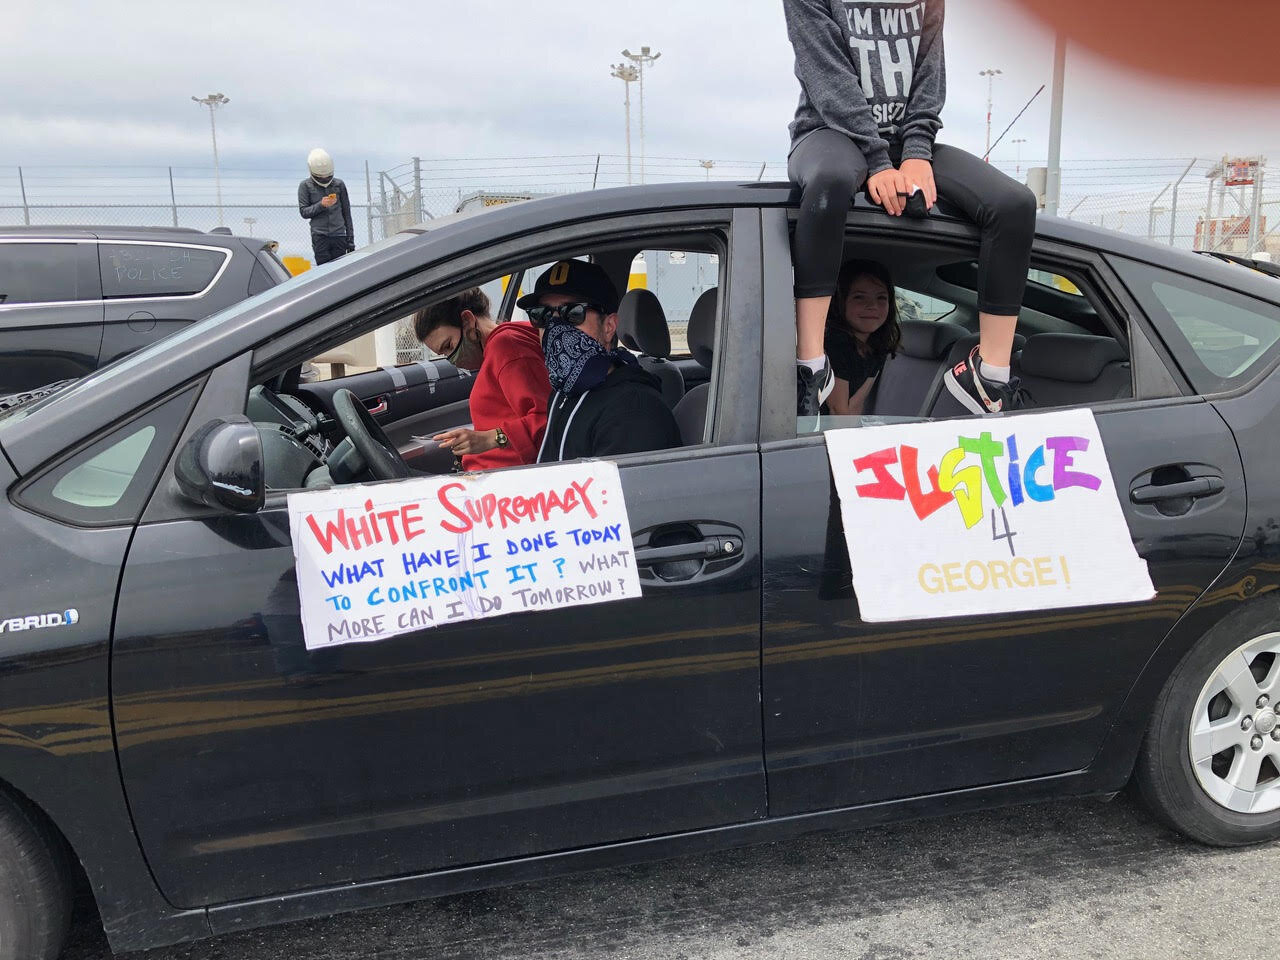 Car protesters with signs that read: White Supremacy: What have I done today to confront it? What more can I do tomorrow? and Justice 4 George!